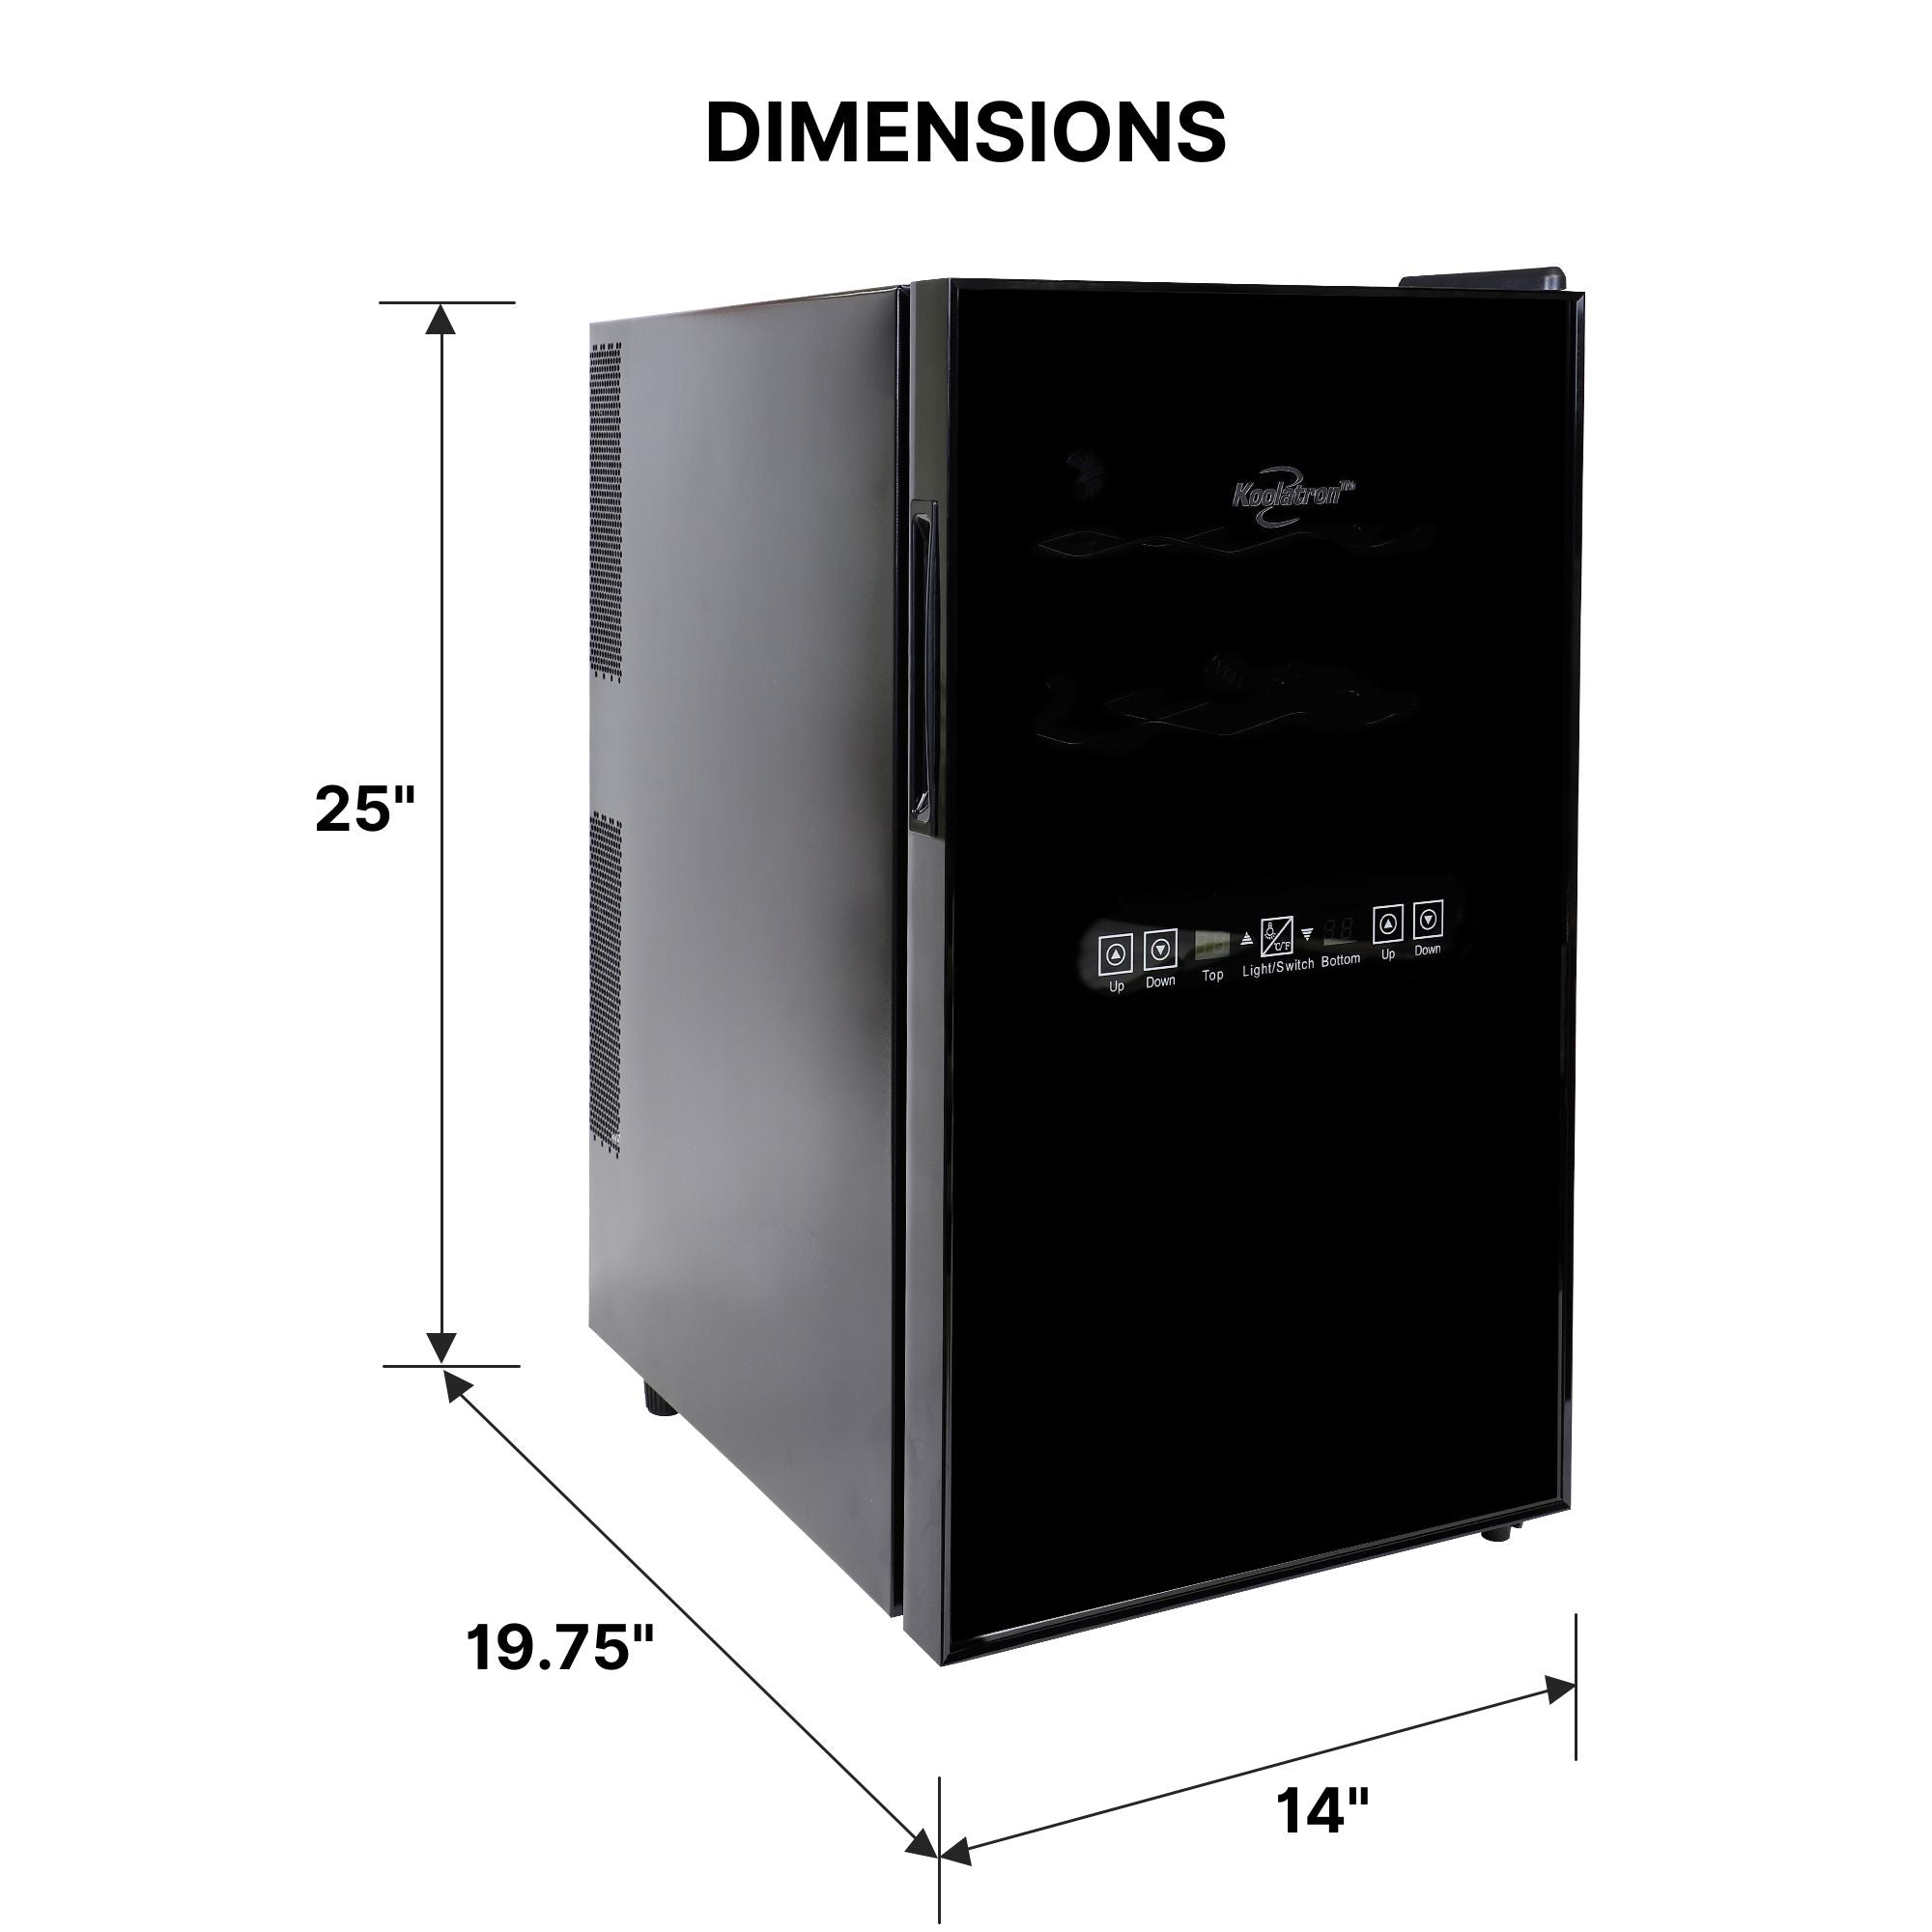  Koolatron 18 bottle dual zone thermoelectric wine fridge on a white background with dimensions labeled